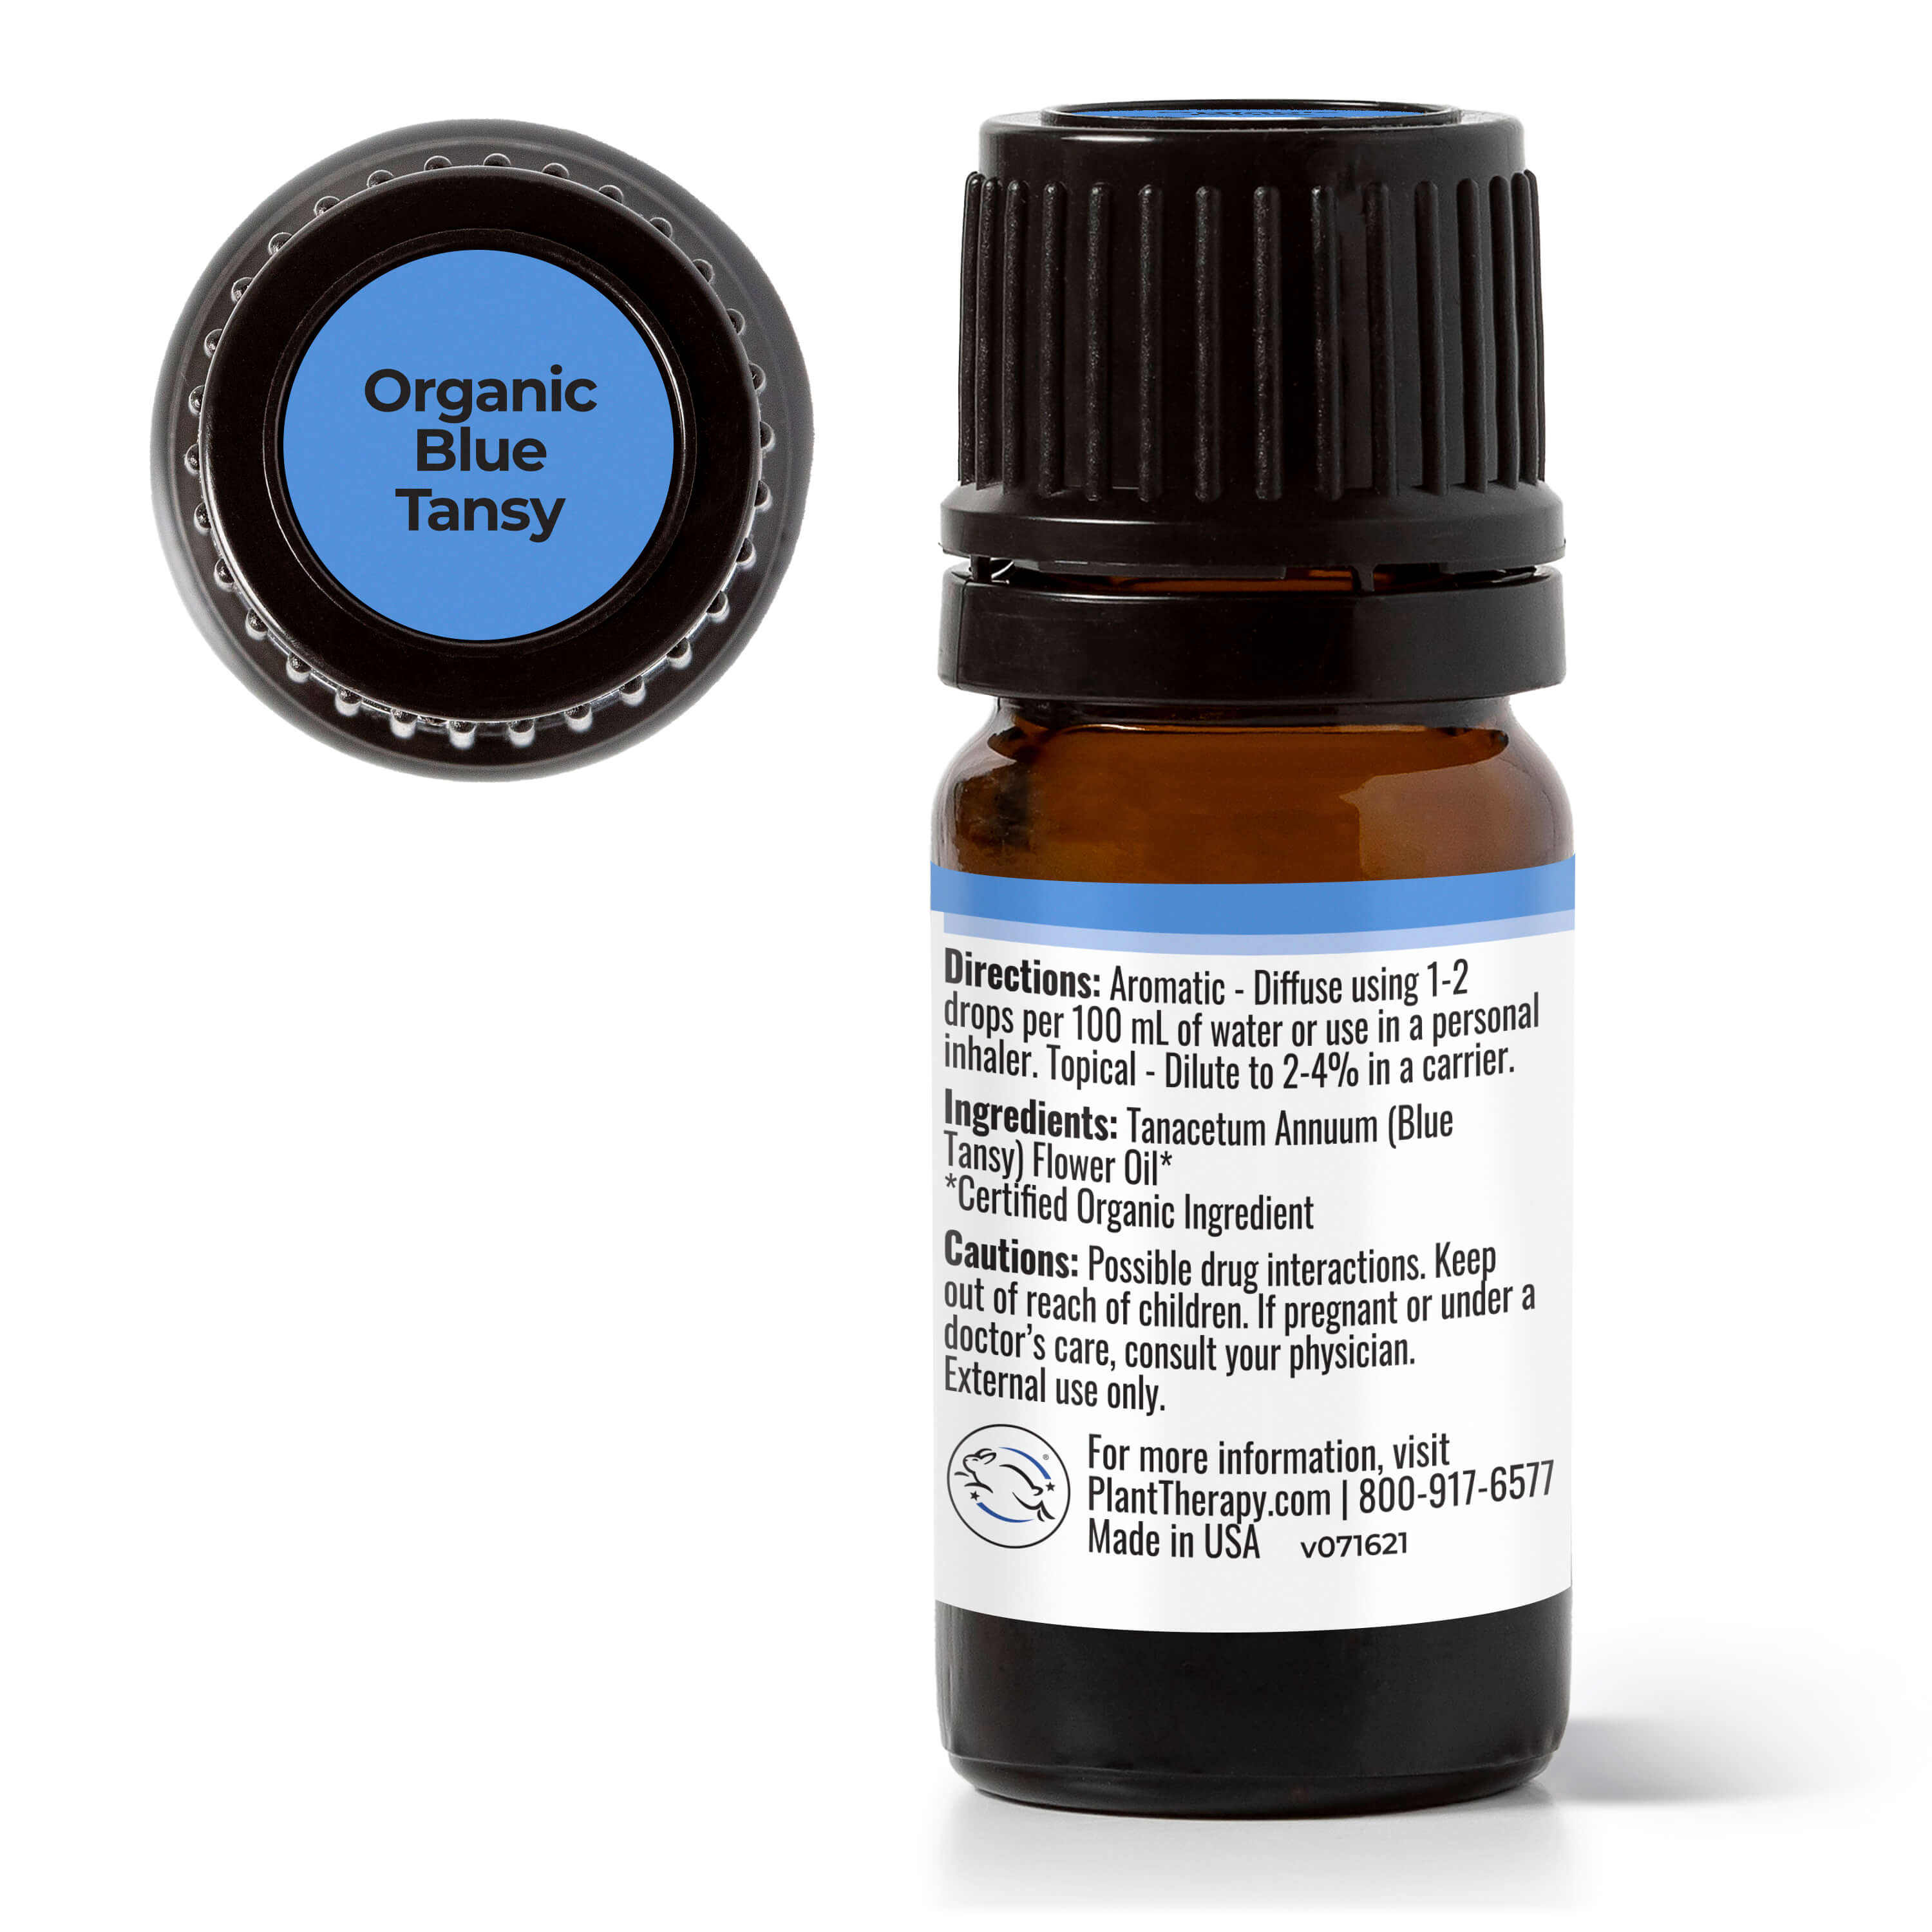 Plant Therapy Organic Blue Tansy Essential Oil 100% Pure, Undiluted, Natural Aromatherapy, Therapeutic Grade 5mL (1/6 oz) - image 5 of 7